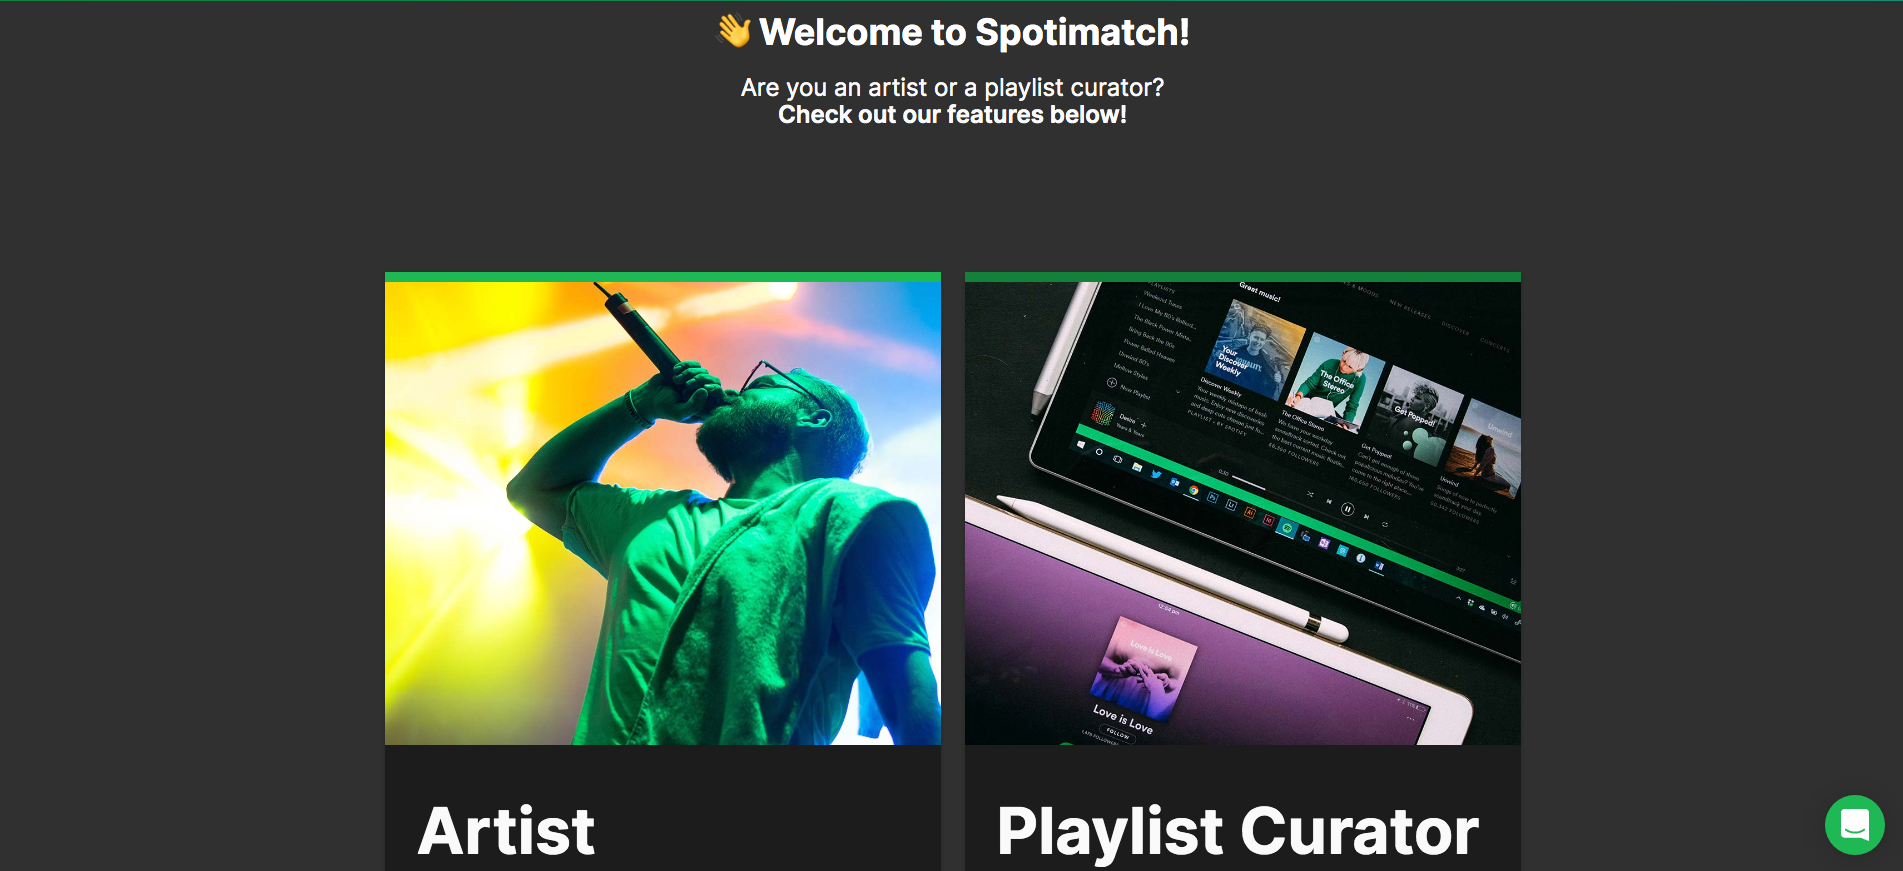 NEW AMAZING FEATURES ON SPOTIMATCH!